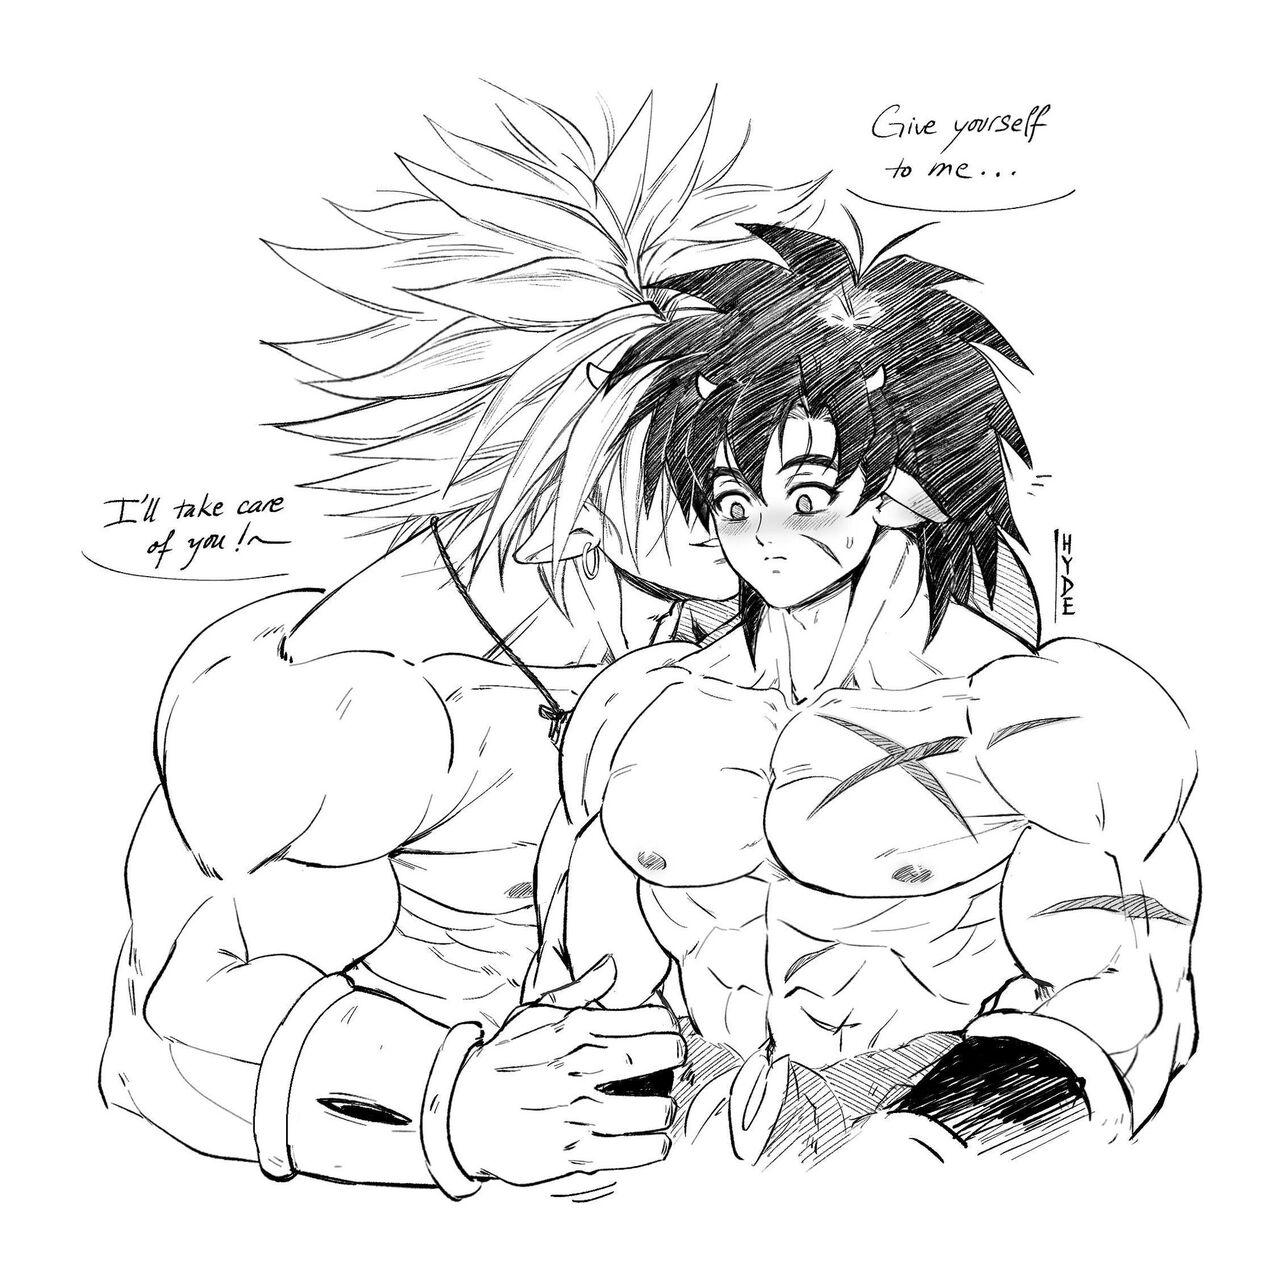 Cow broly 8